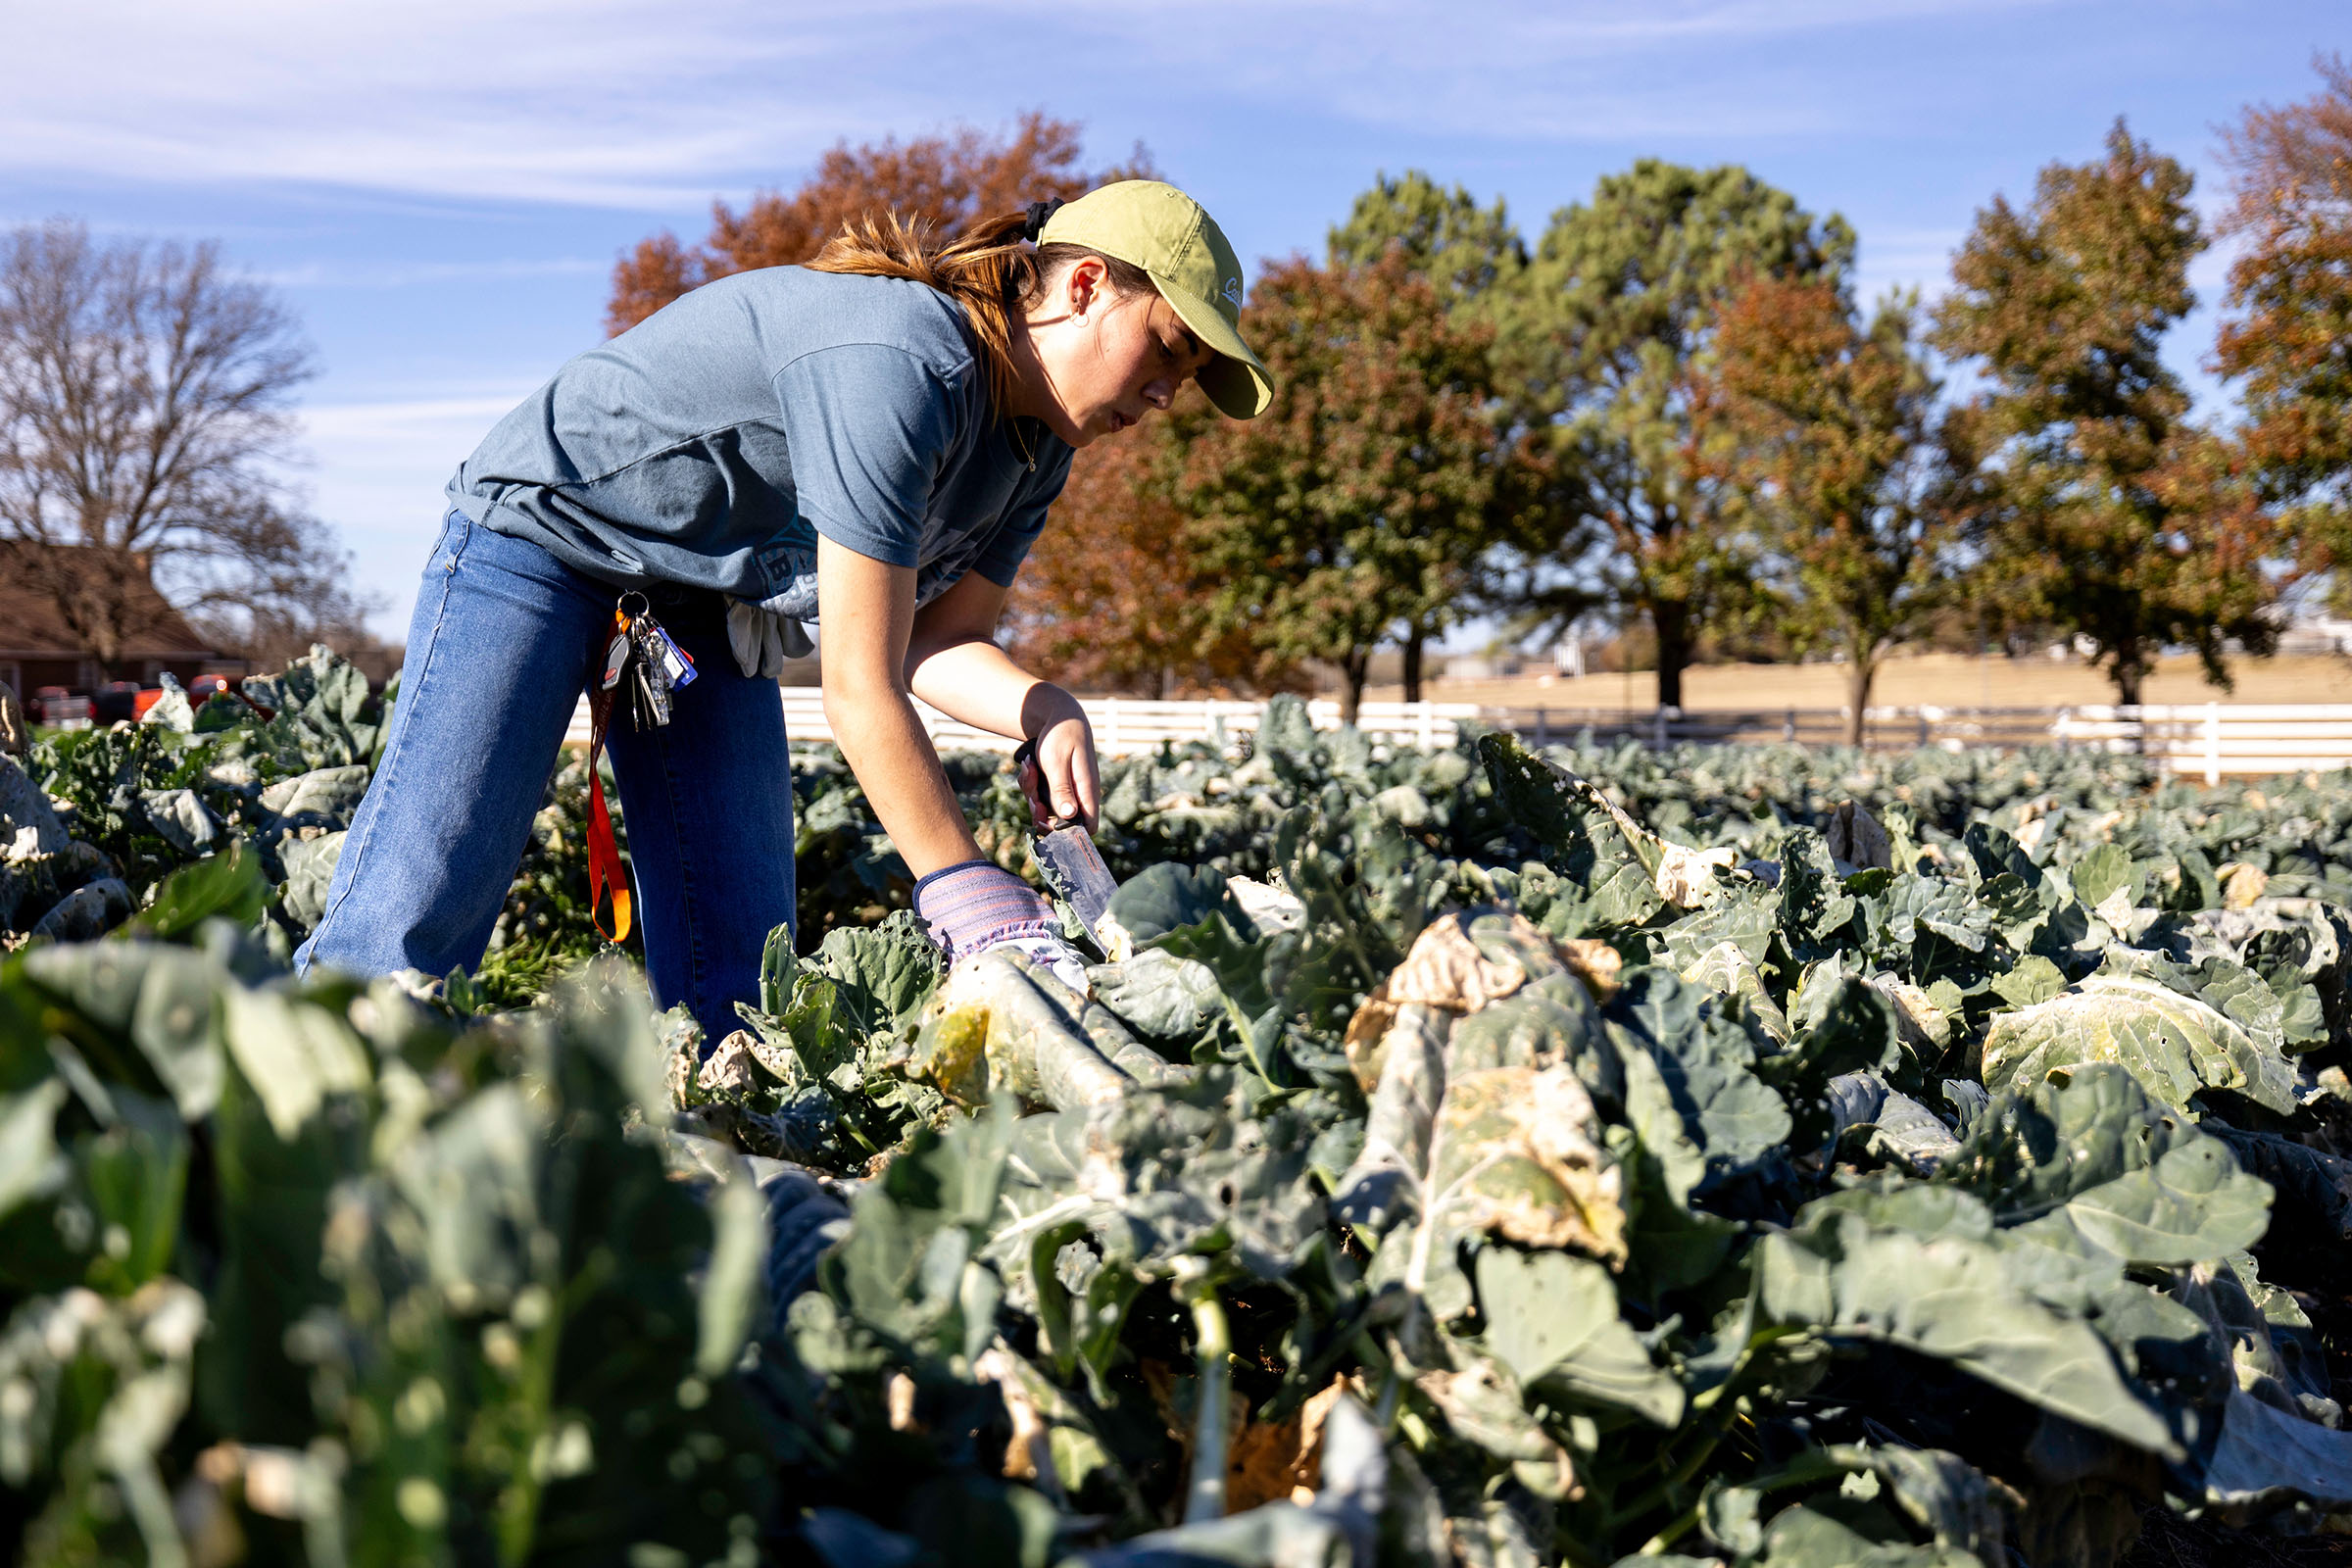 Students at the OSU Student Farm are involved in every phase of establishing and operating the university’s commercial garden, which provides hands-on experience in vegetable production. (Photo by Mitchell Alcala, OSU Agriculture.)